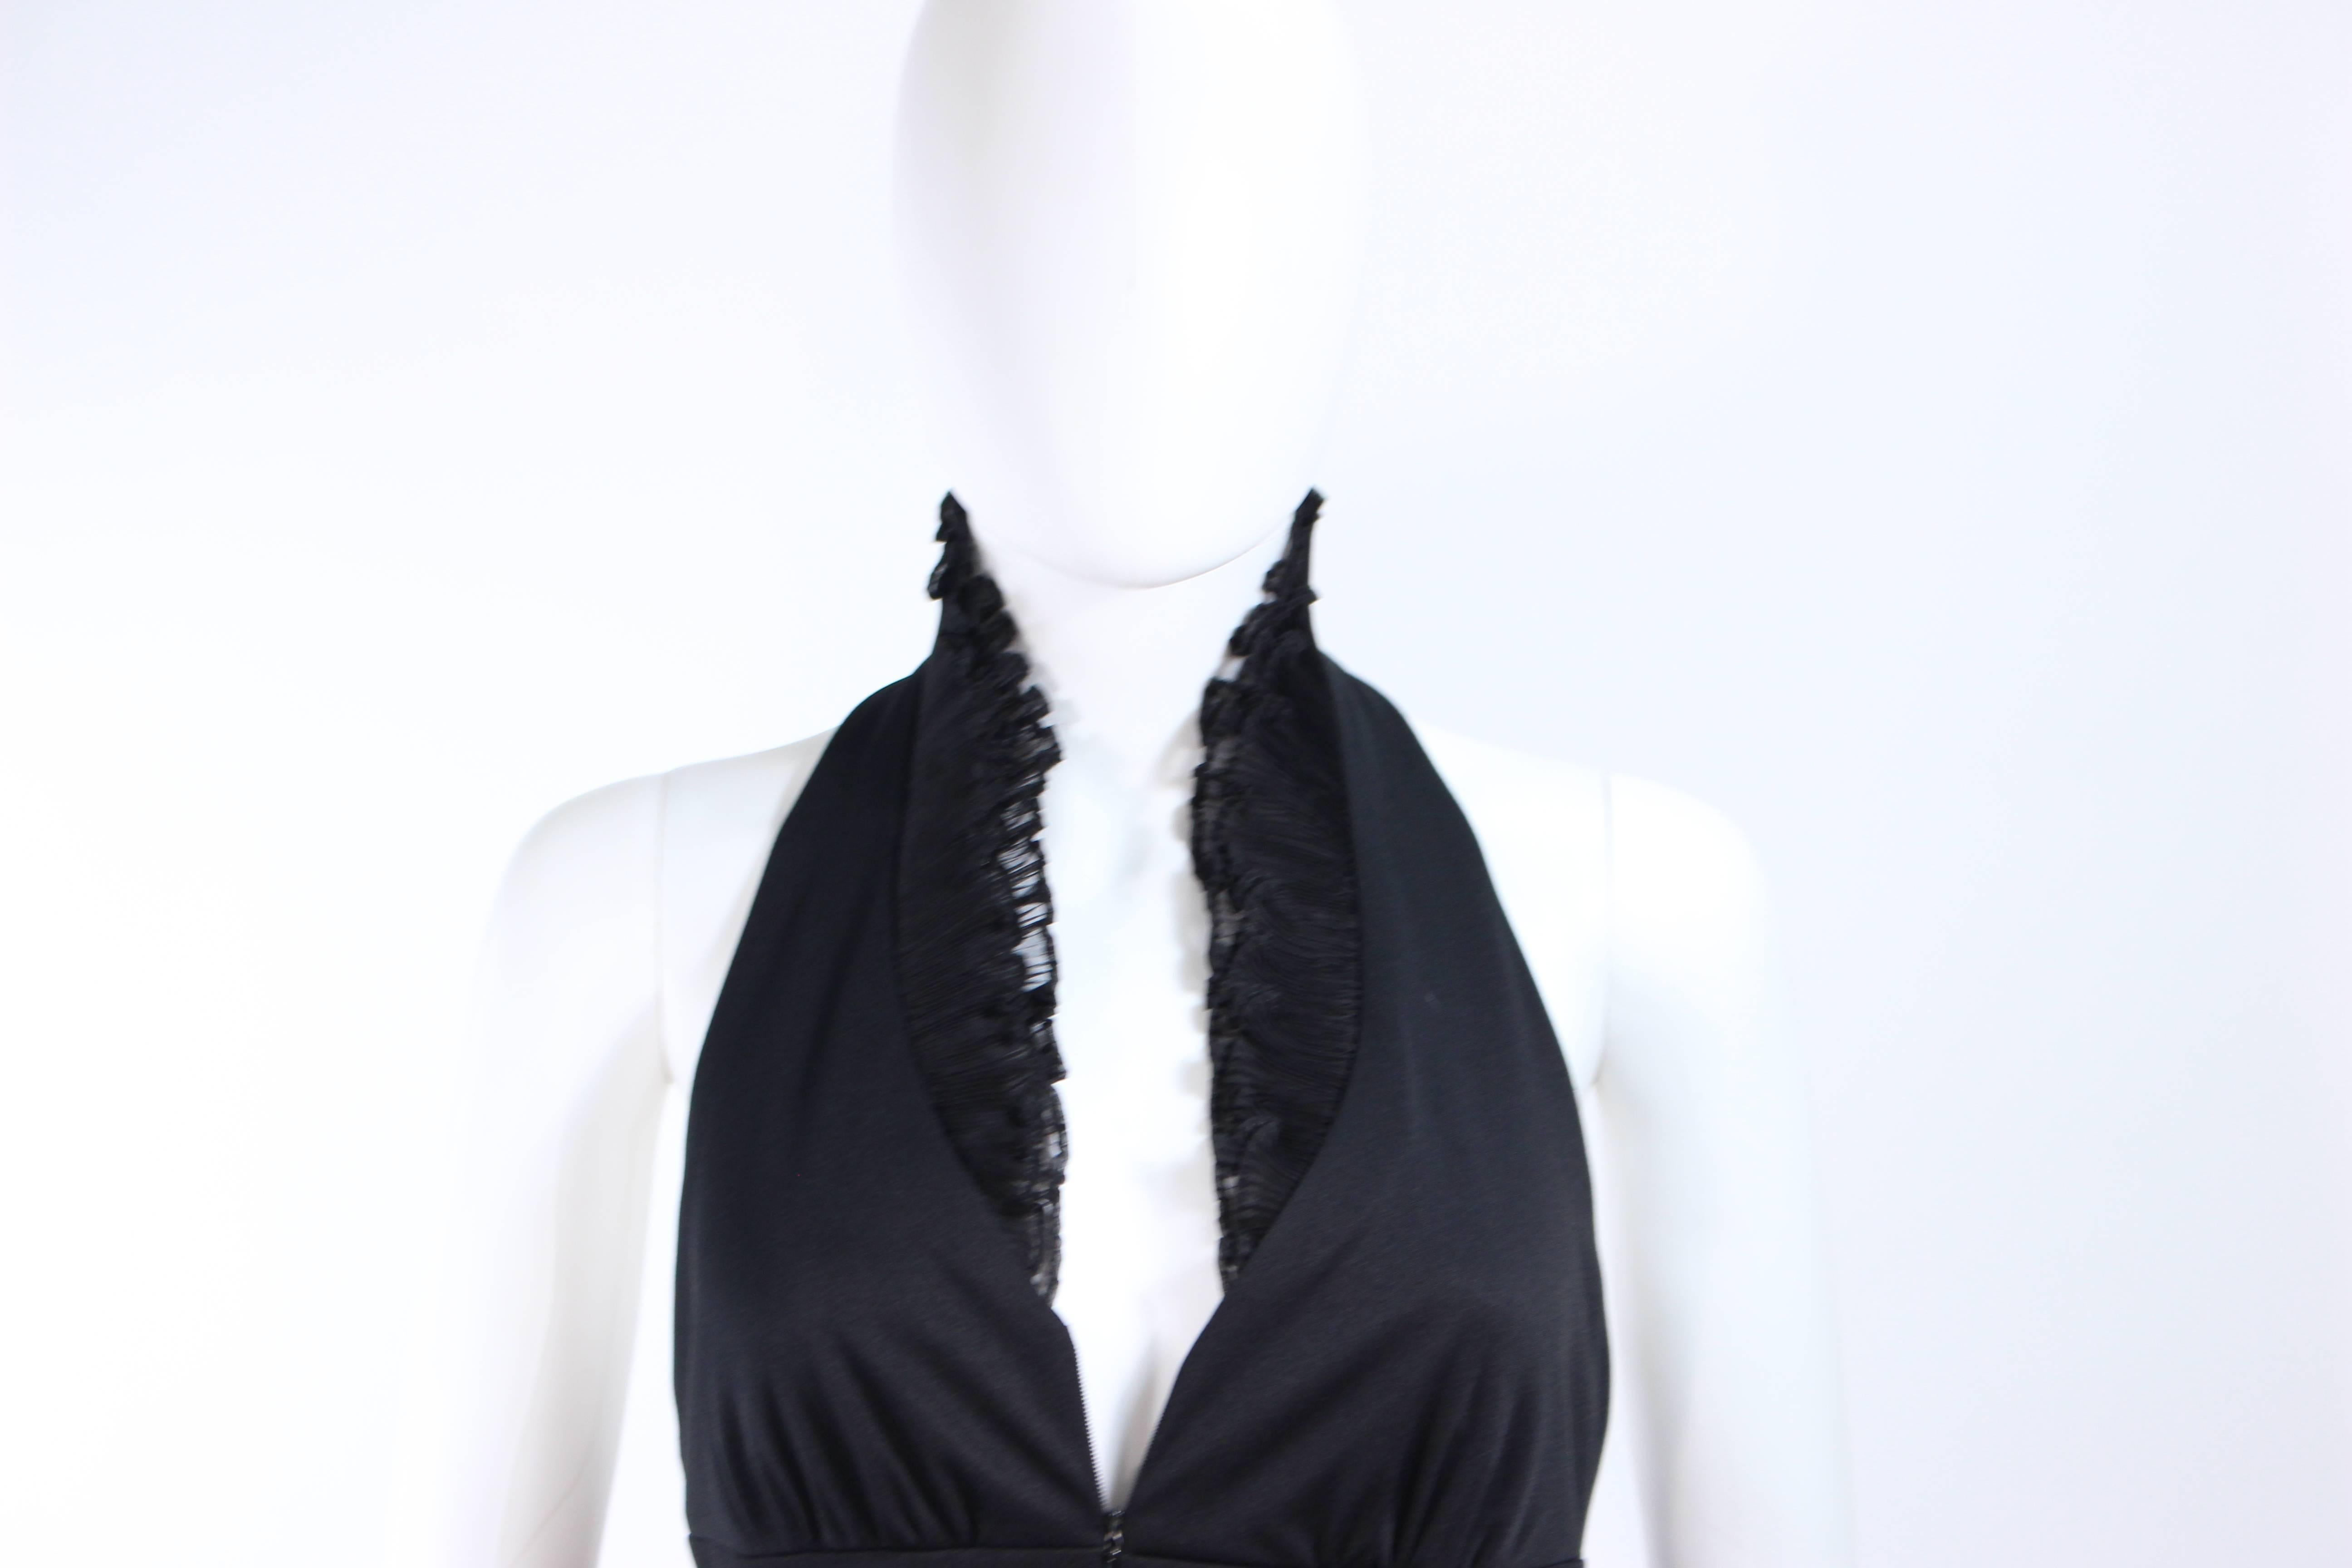 Vintage 1970's Black Jersey Halter Dress with Ruffled Collar Size 6  In Excellent Condition For Sale In Los Angeles, CA